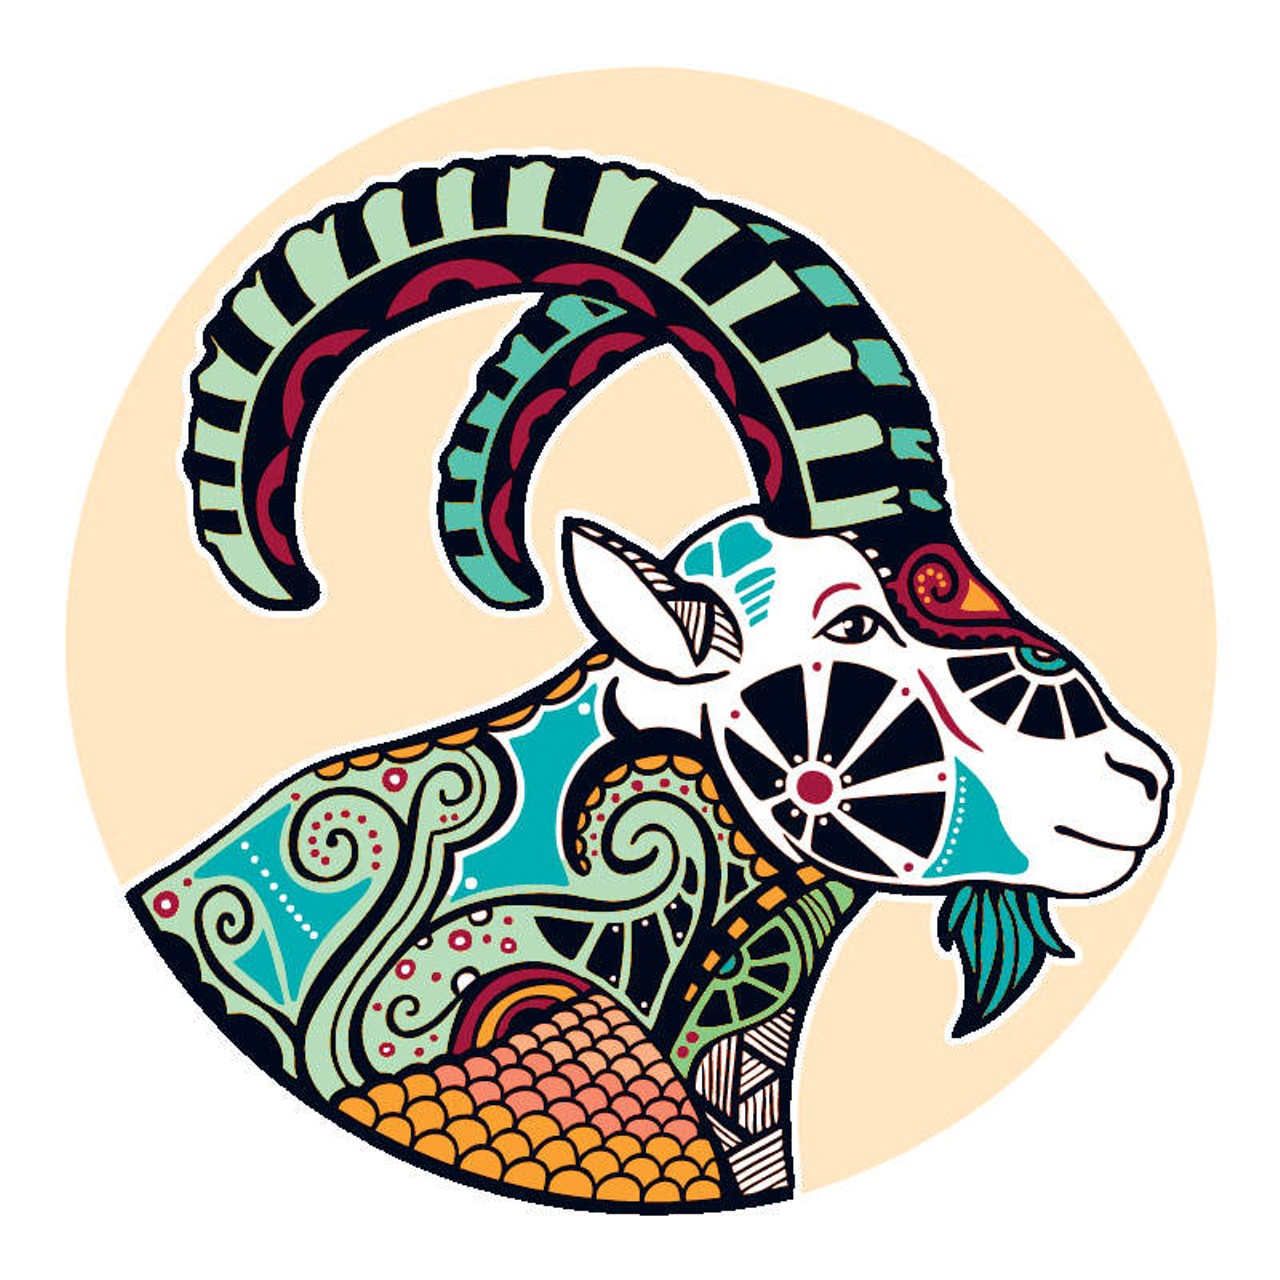 CAPRICORN (Dec. 21-Jan. 20): 
Something&#146;s changing but it&#146;s not time yet. You either need a little more external support or you&#146;re thinking you&#146;d be better off giving it up and going for broke. It&#146;d be easier for you to glide through this transition if you didn&#146;t take the drastic approach. And unless you&#146;re being guided by your inner truth, you&#146;d be nuts to let your instincts get you into a deeper hole. Something&#146;s going to come along and lift you out of this. It could be a relative but it&#146;s more likely that it&#146;s someone who cares, and just happens to notice that you could use a little help.